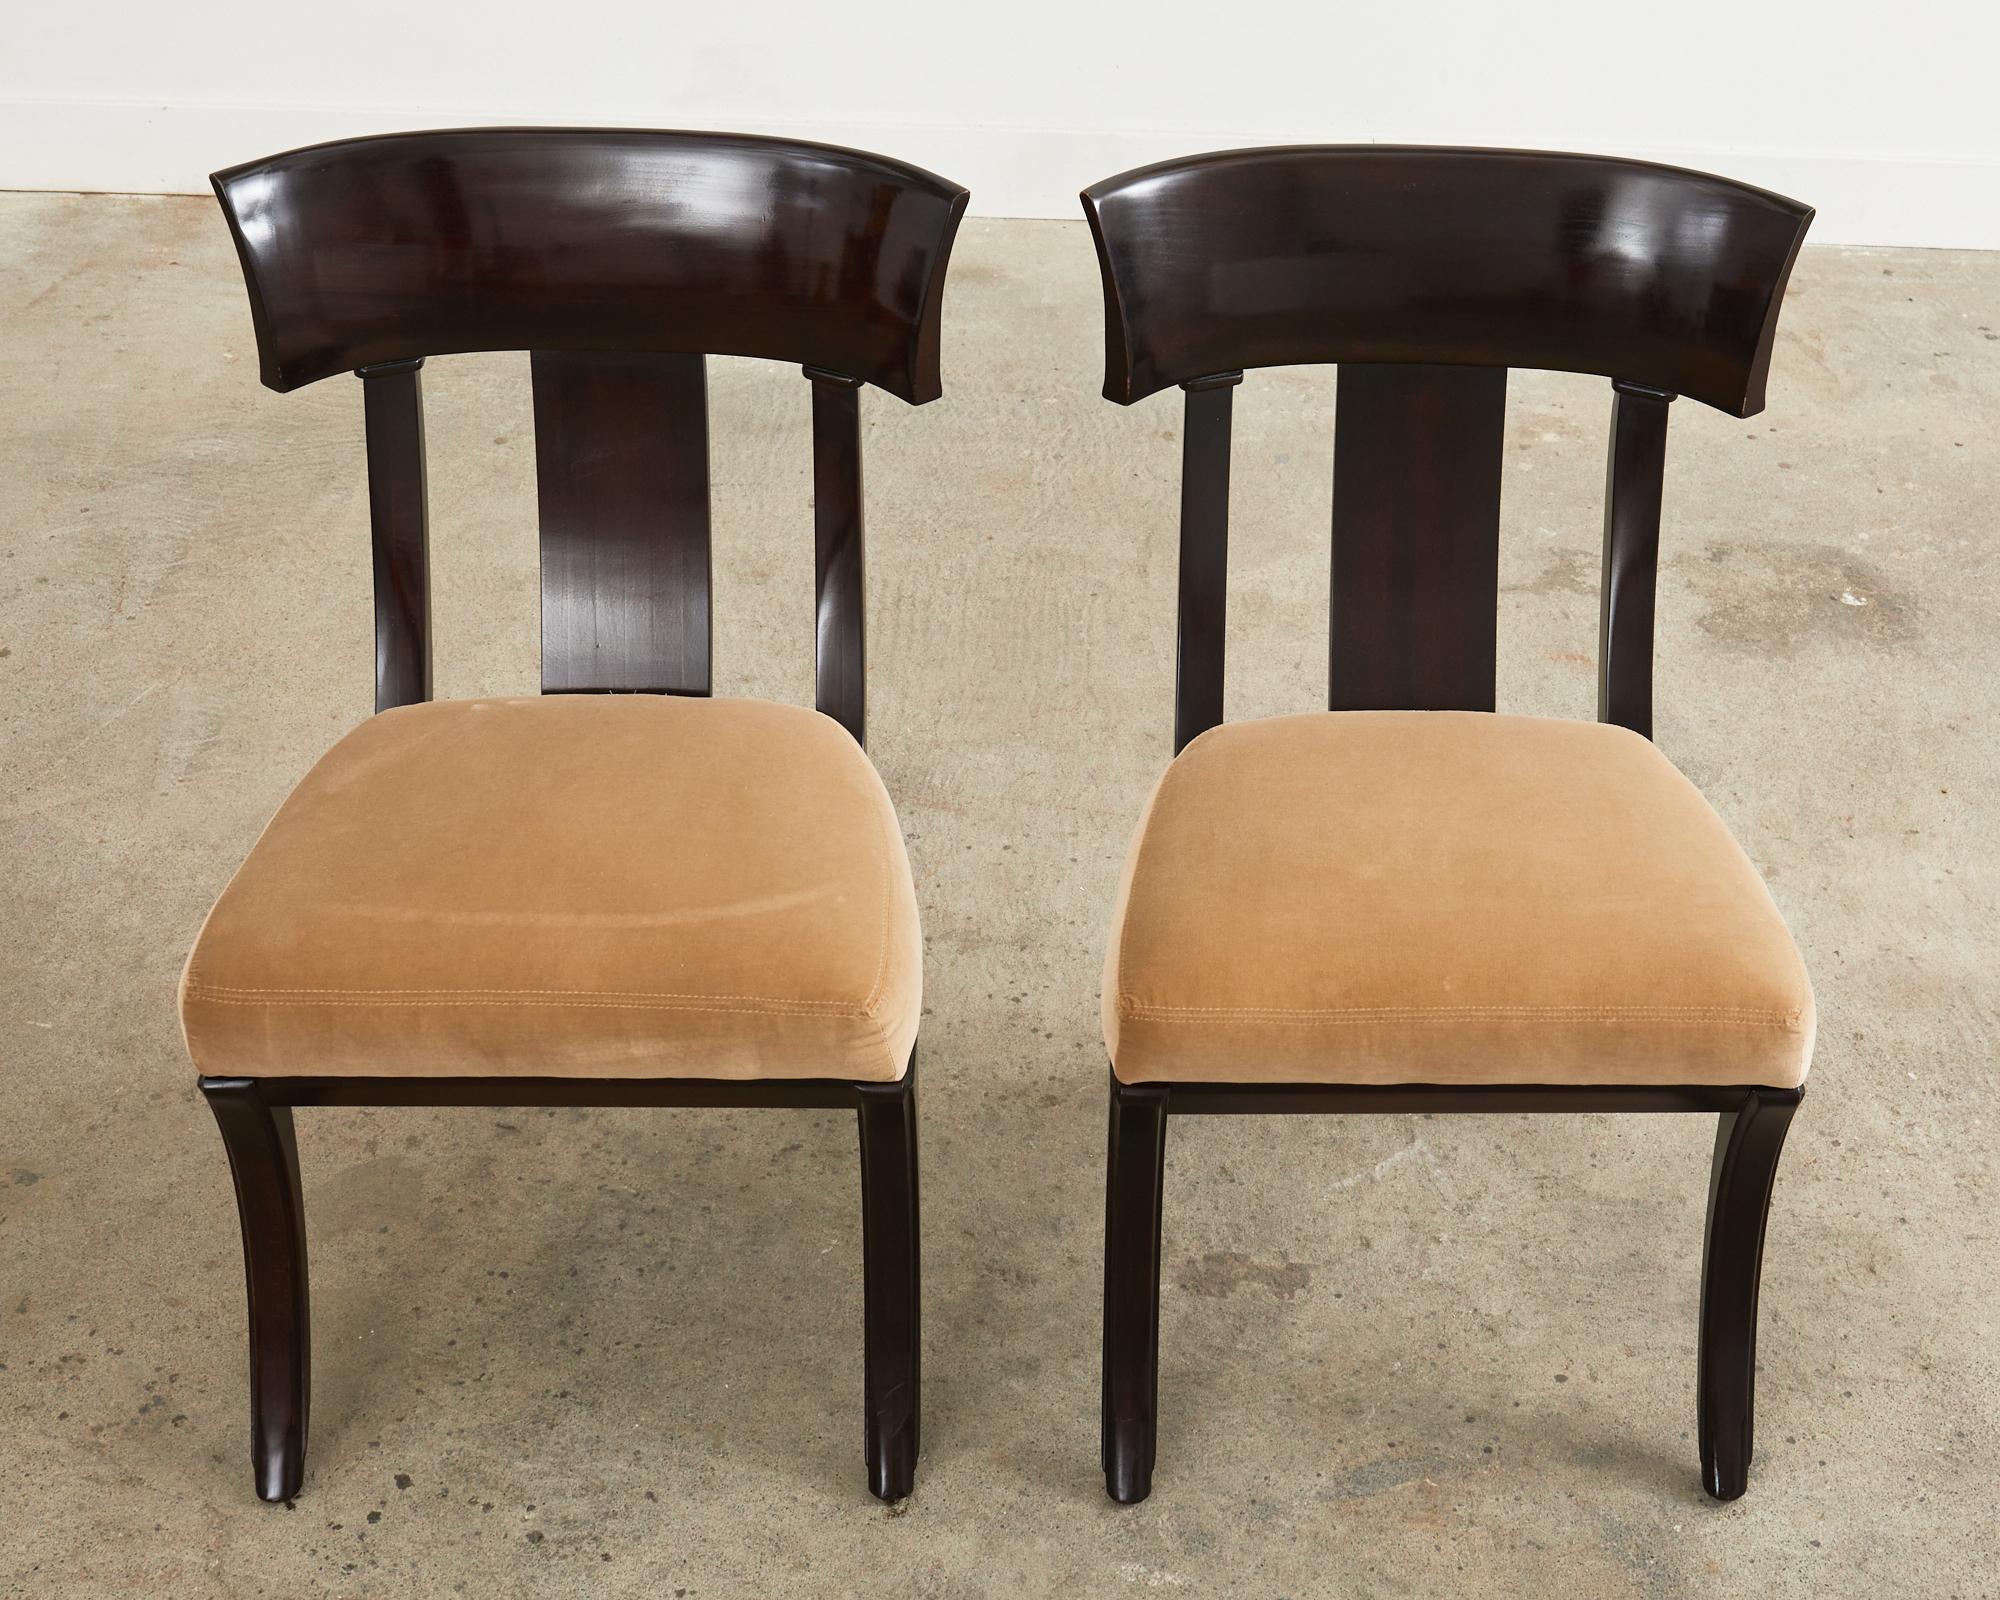 Hand-Crafted Set of Six Neoclassical Klismos Style Dining Chairs by Henredon